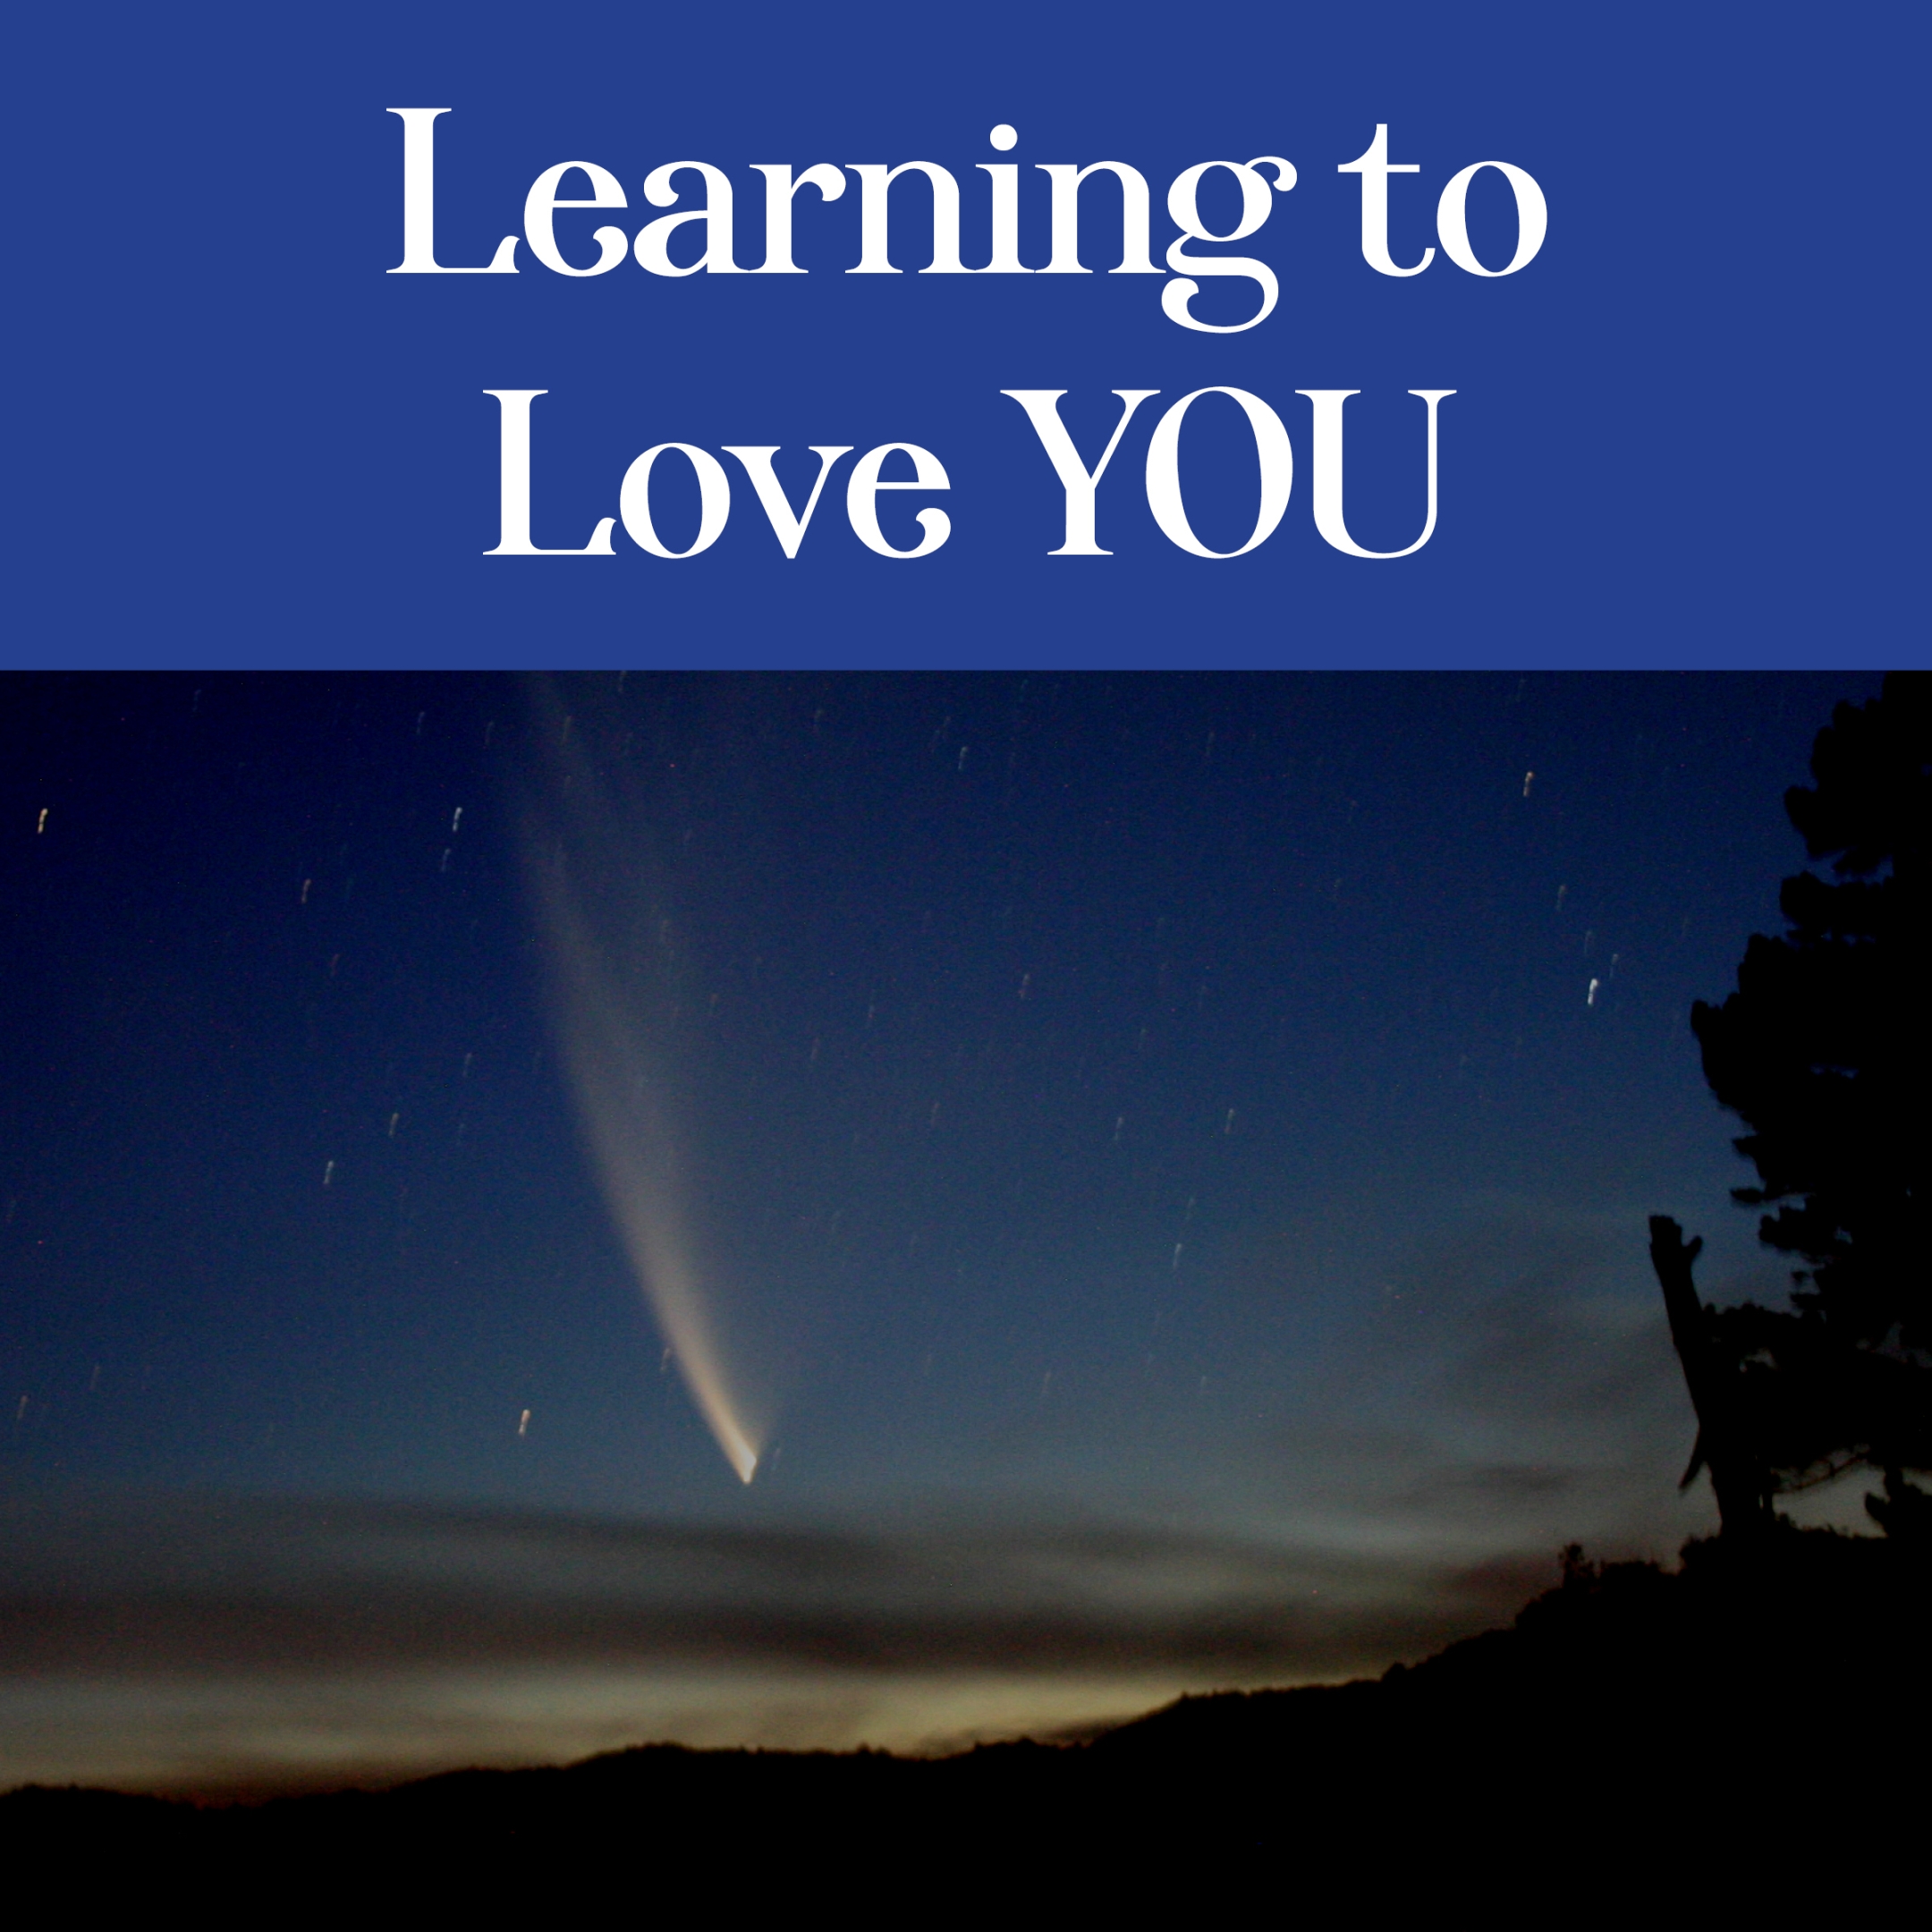 Learning to Love You